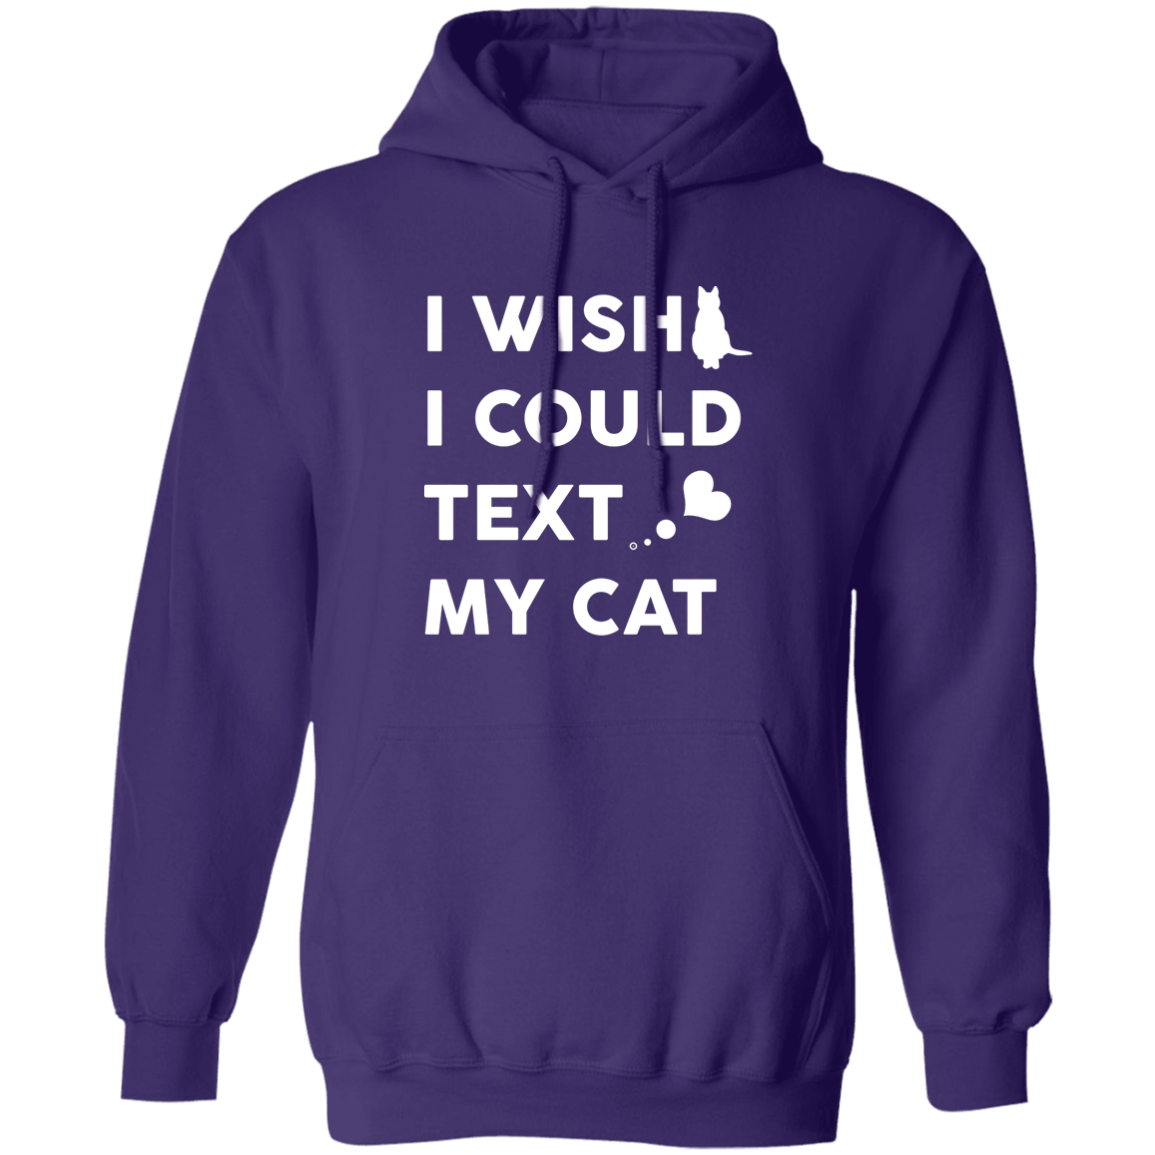 I Wish I Could Text My Cat - Hoodie.